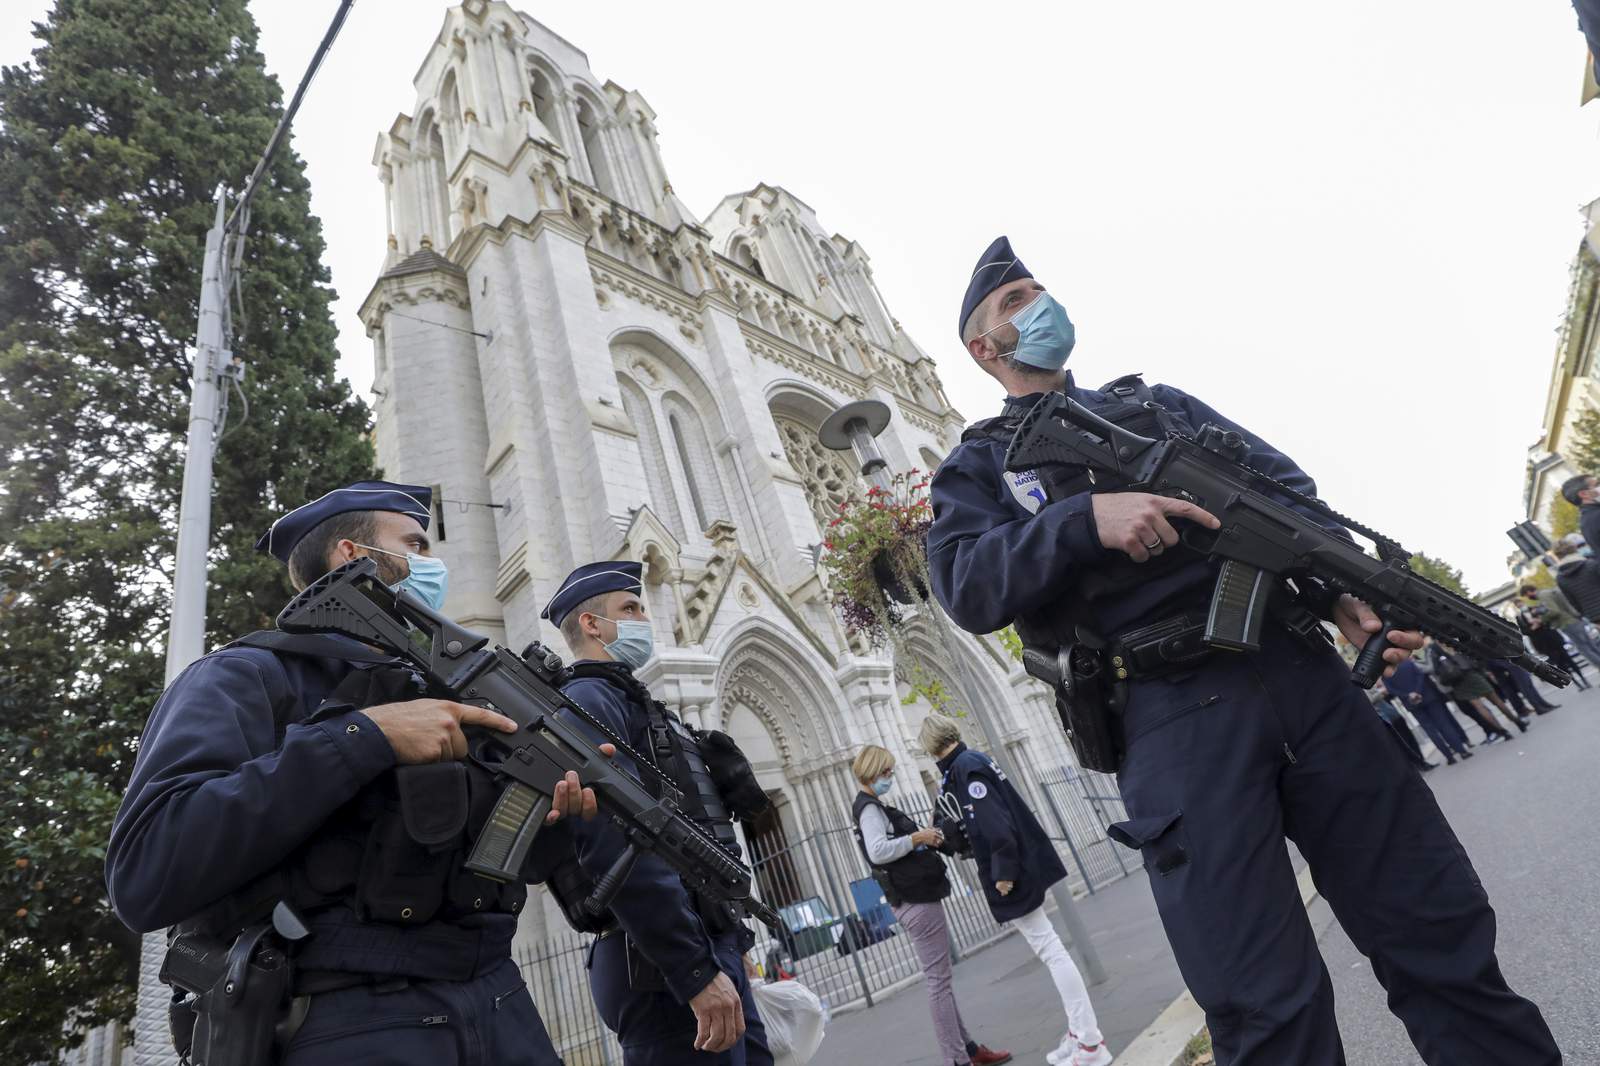 New arrest after France church attack, security tightened